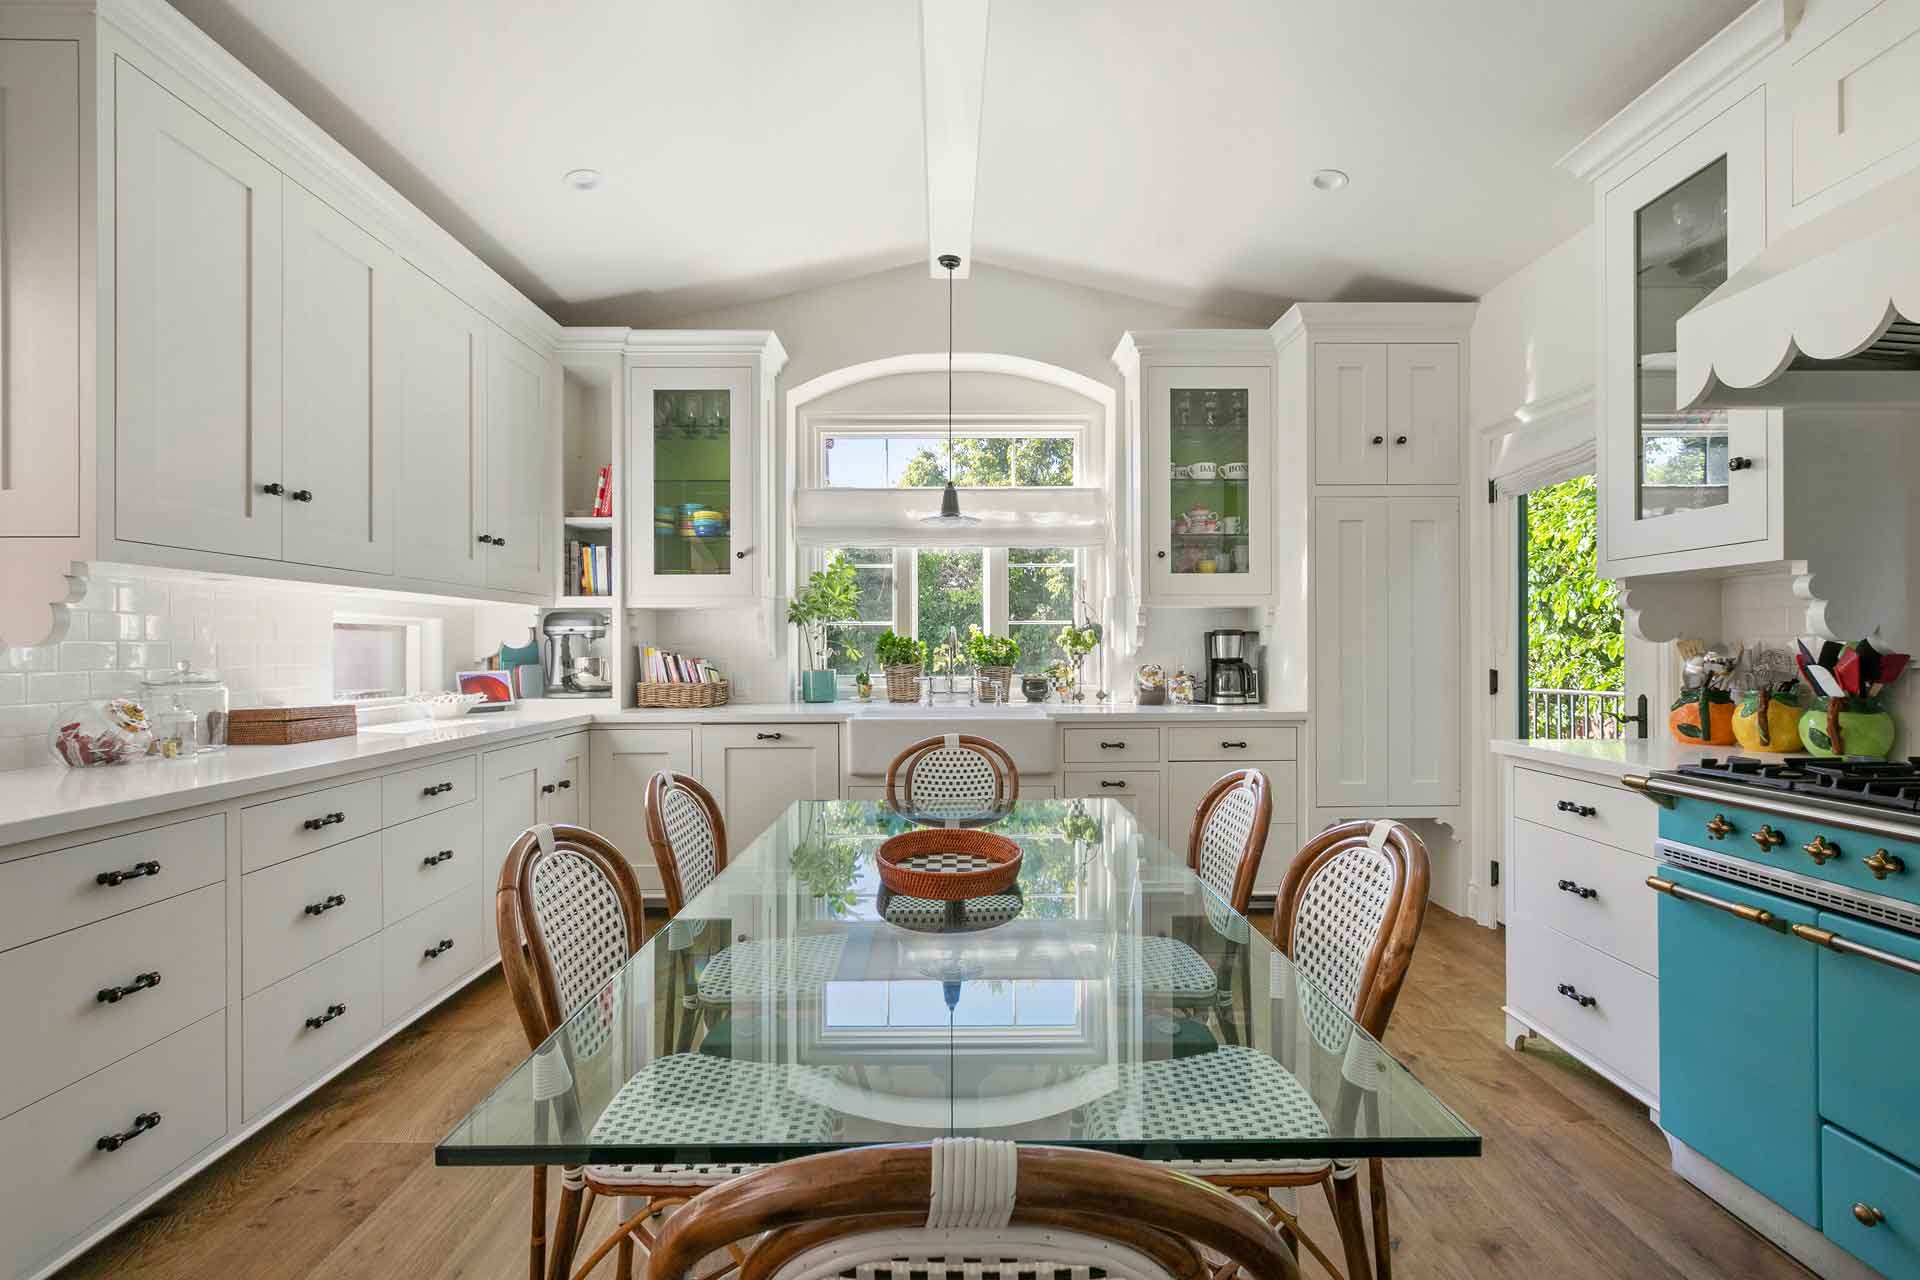 Cottage-style kitchen with white cabinetry and a central glass dining table